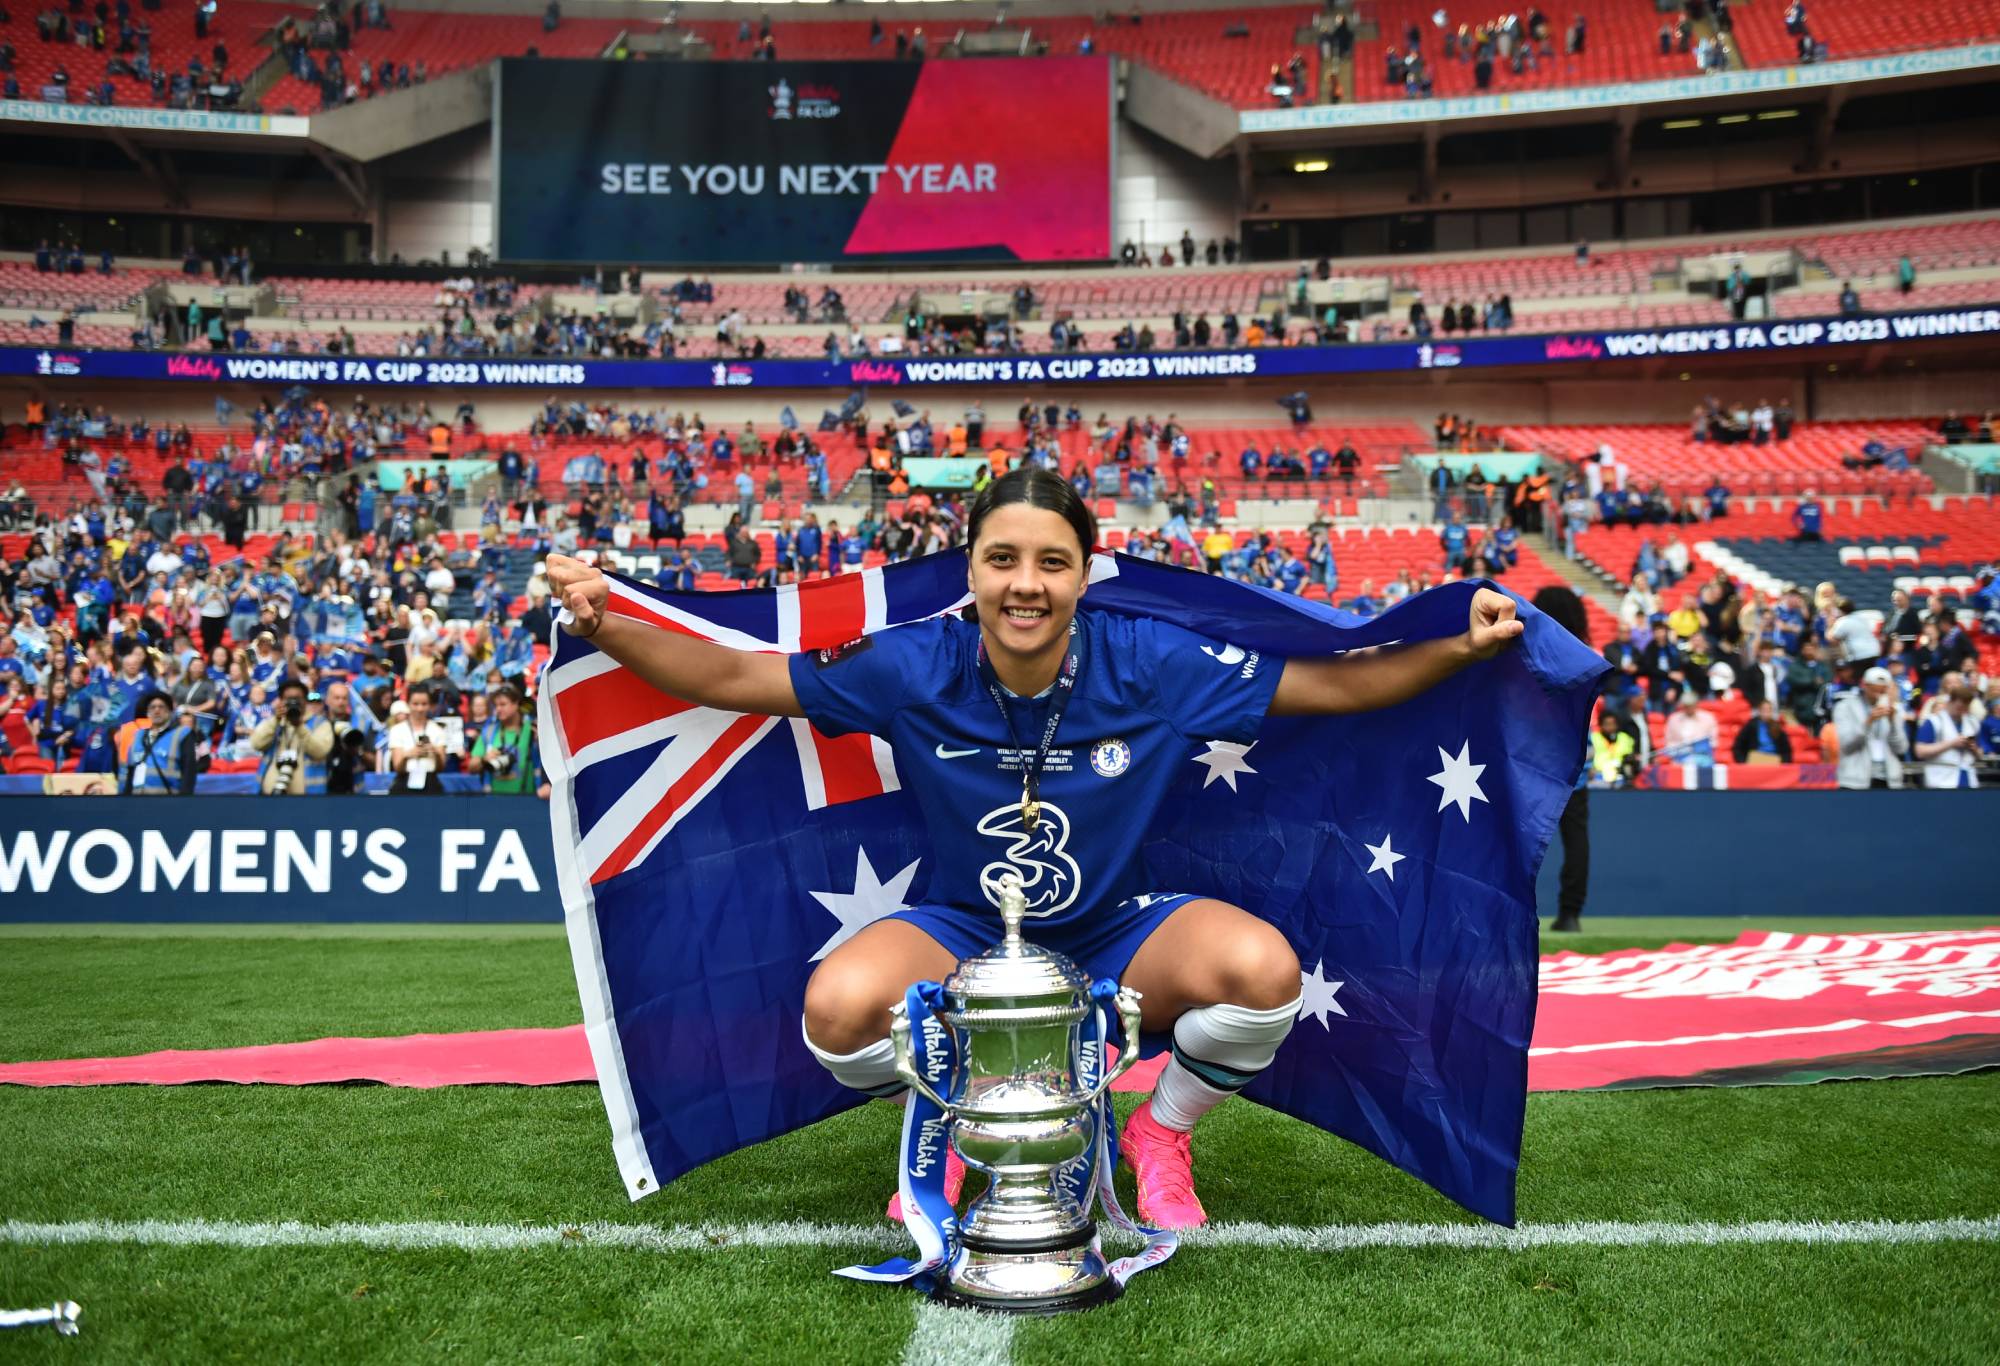 Sam Kerr of Chelsea celebrates with the Vitality Women's FA Cup trophy following her victory in the Vitality Women's FA Cup Final between Chelsea FC and Manchester United at Wembley Stadium on May 14, 2023 in London, England. (Photo by Harriet Lander - Chelsea FC/Chelsea FC via Getty Images)